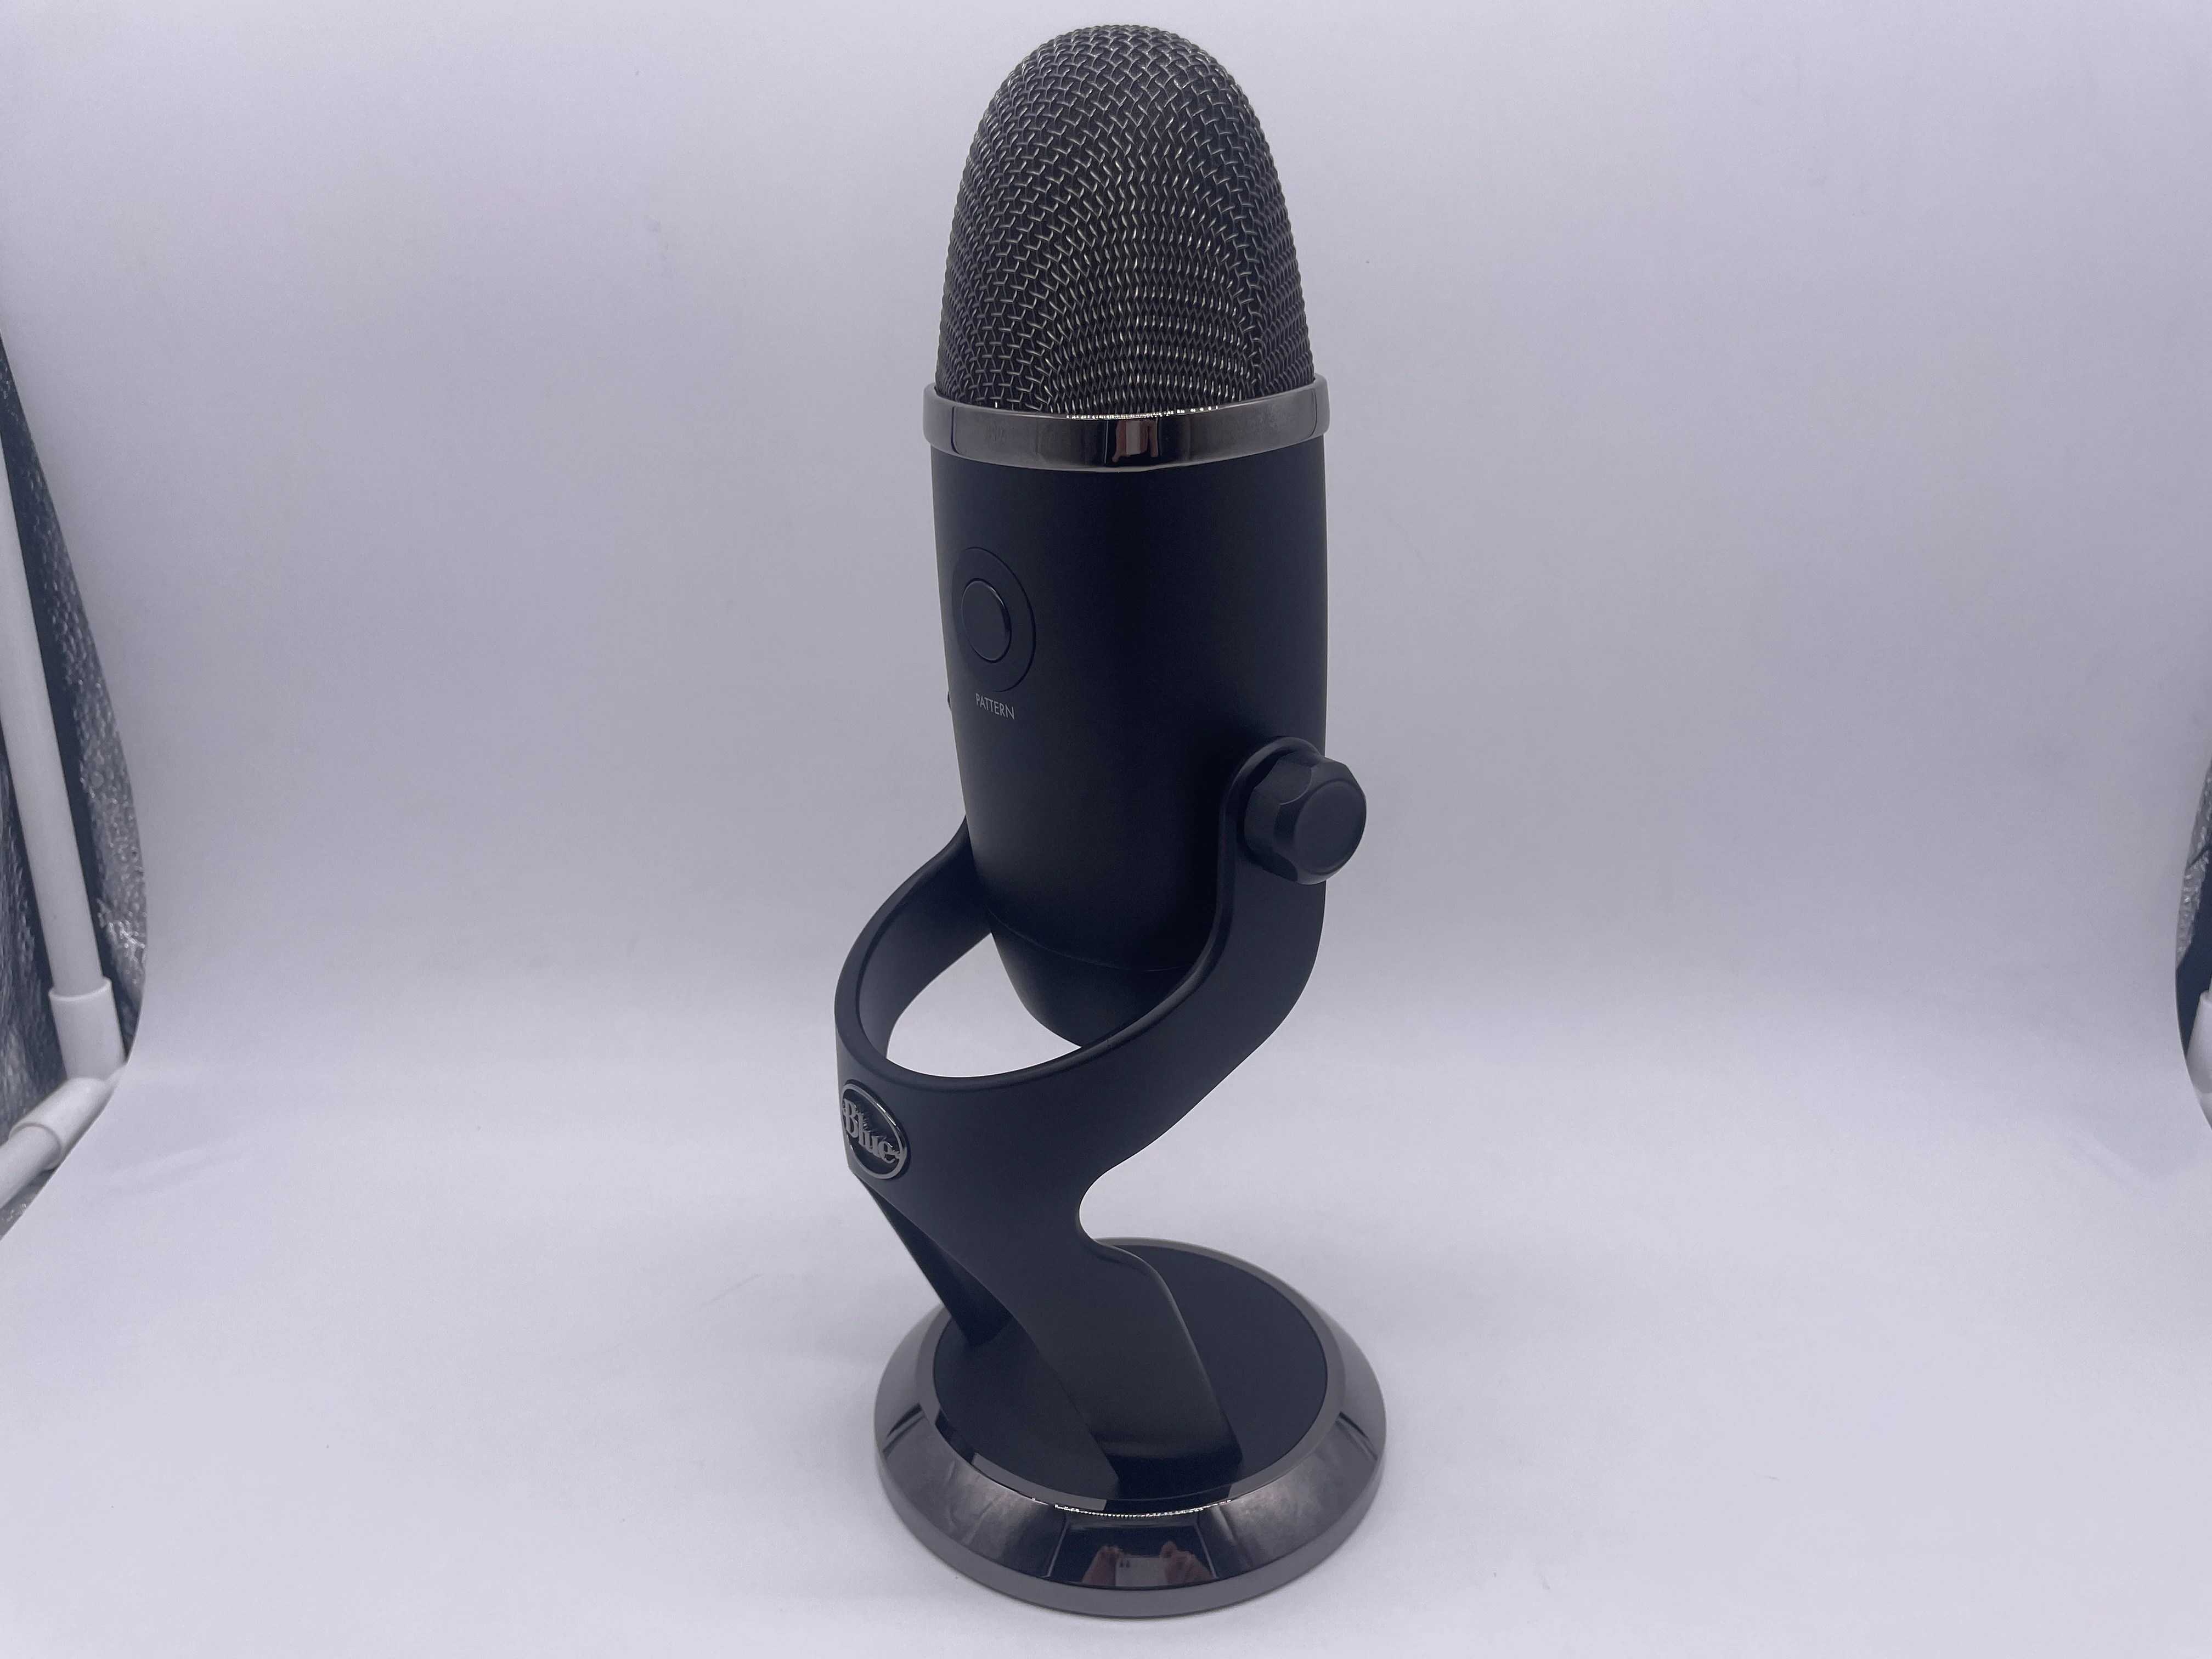 Blue Yeti Upgrades: Accessories To Improve Your Yeti Microphone